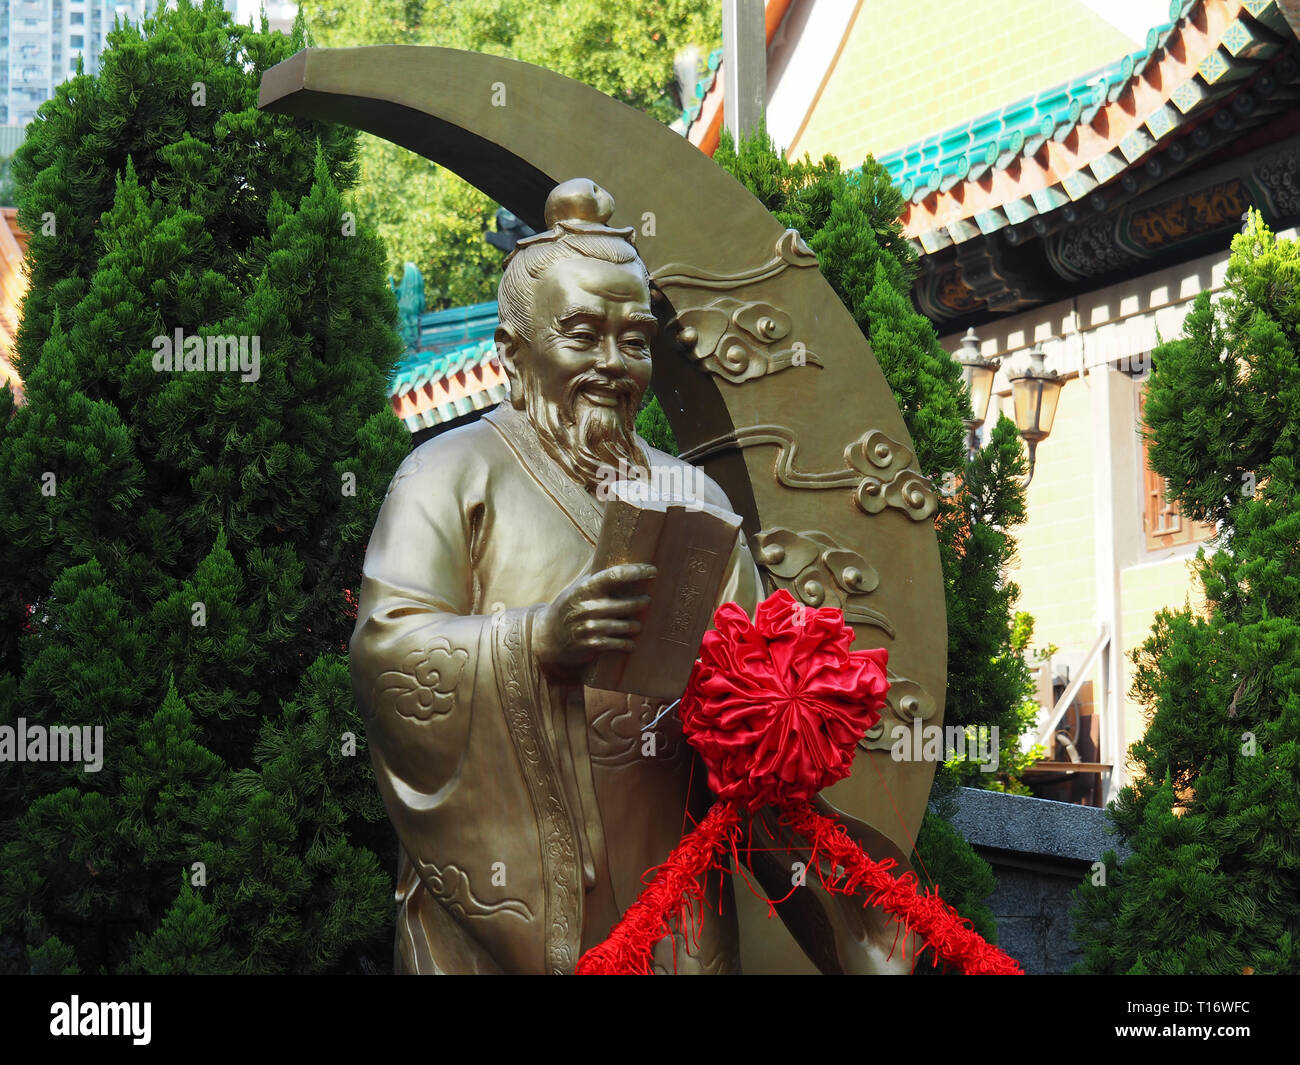 Kowloon, Hong Kong - November 03, 2017: An image of Yue Lao the god of marriage and love. The statue can be found in the Wong Tai Sin temple in Hong K Stock Photo